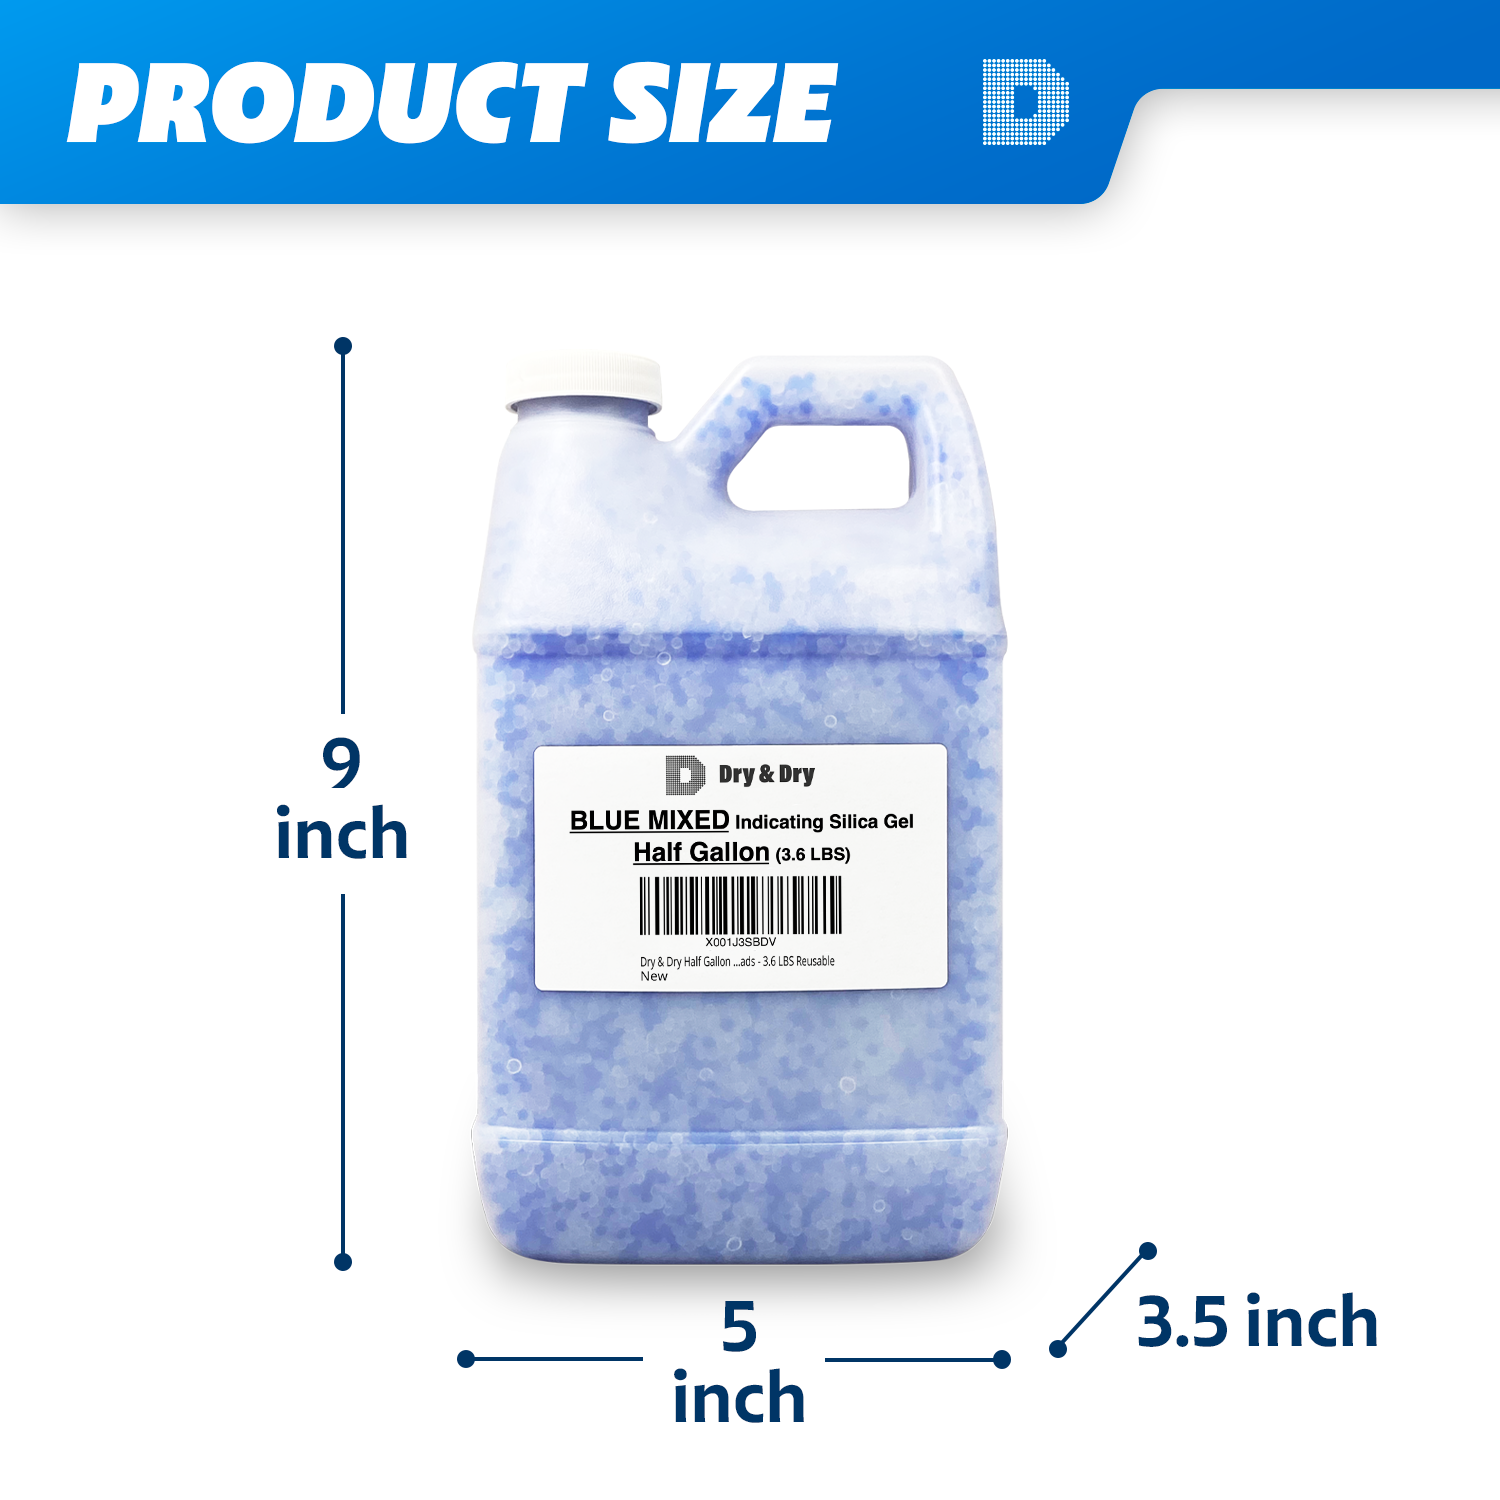 10 LBS Dry & Dry Premium White Silica Gel Beads (Industry Standard 2-4  mm) - 10 LBS Reusable 